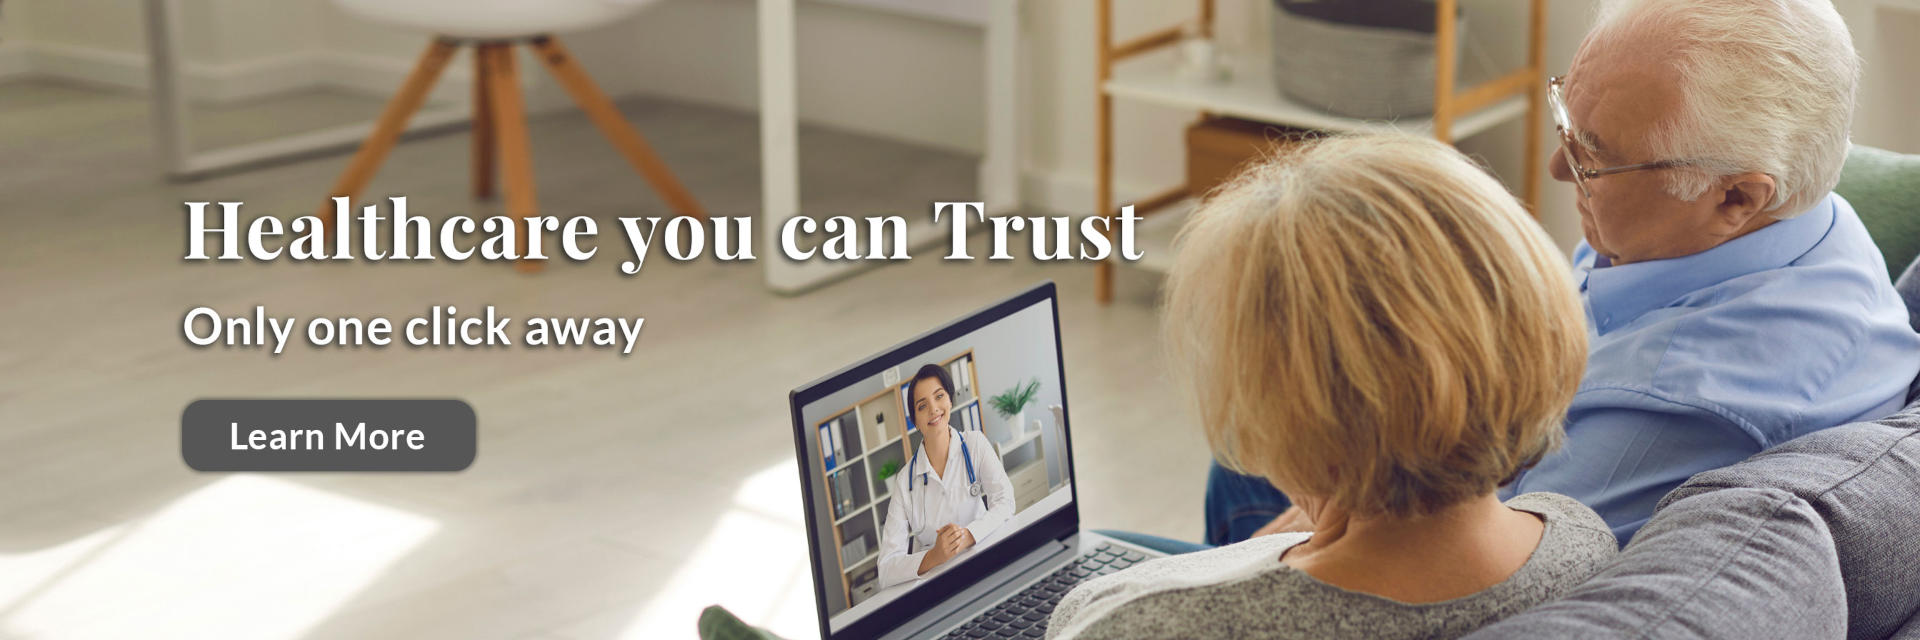 Healthcare you can Trust
Only one click away
(Learn More)